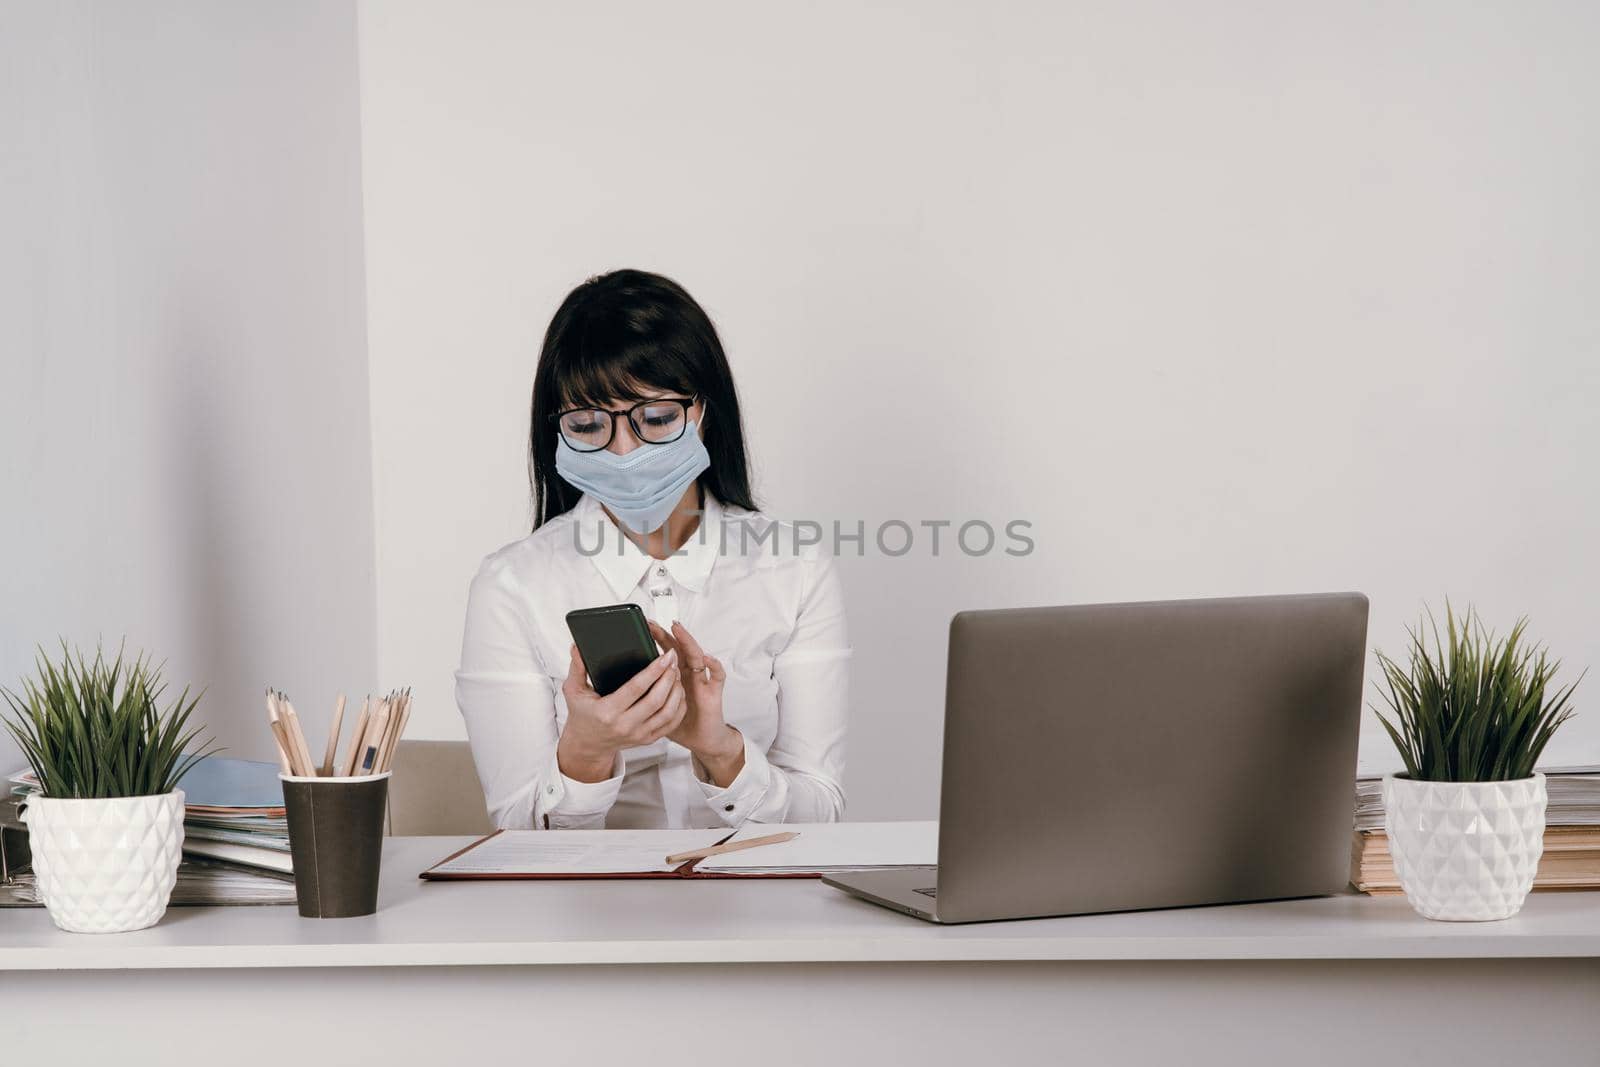 A young woman works remotely in the office with a protective mask during an epidemic. Looks at the message in the smartphone